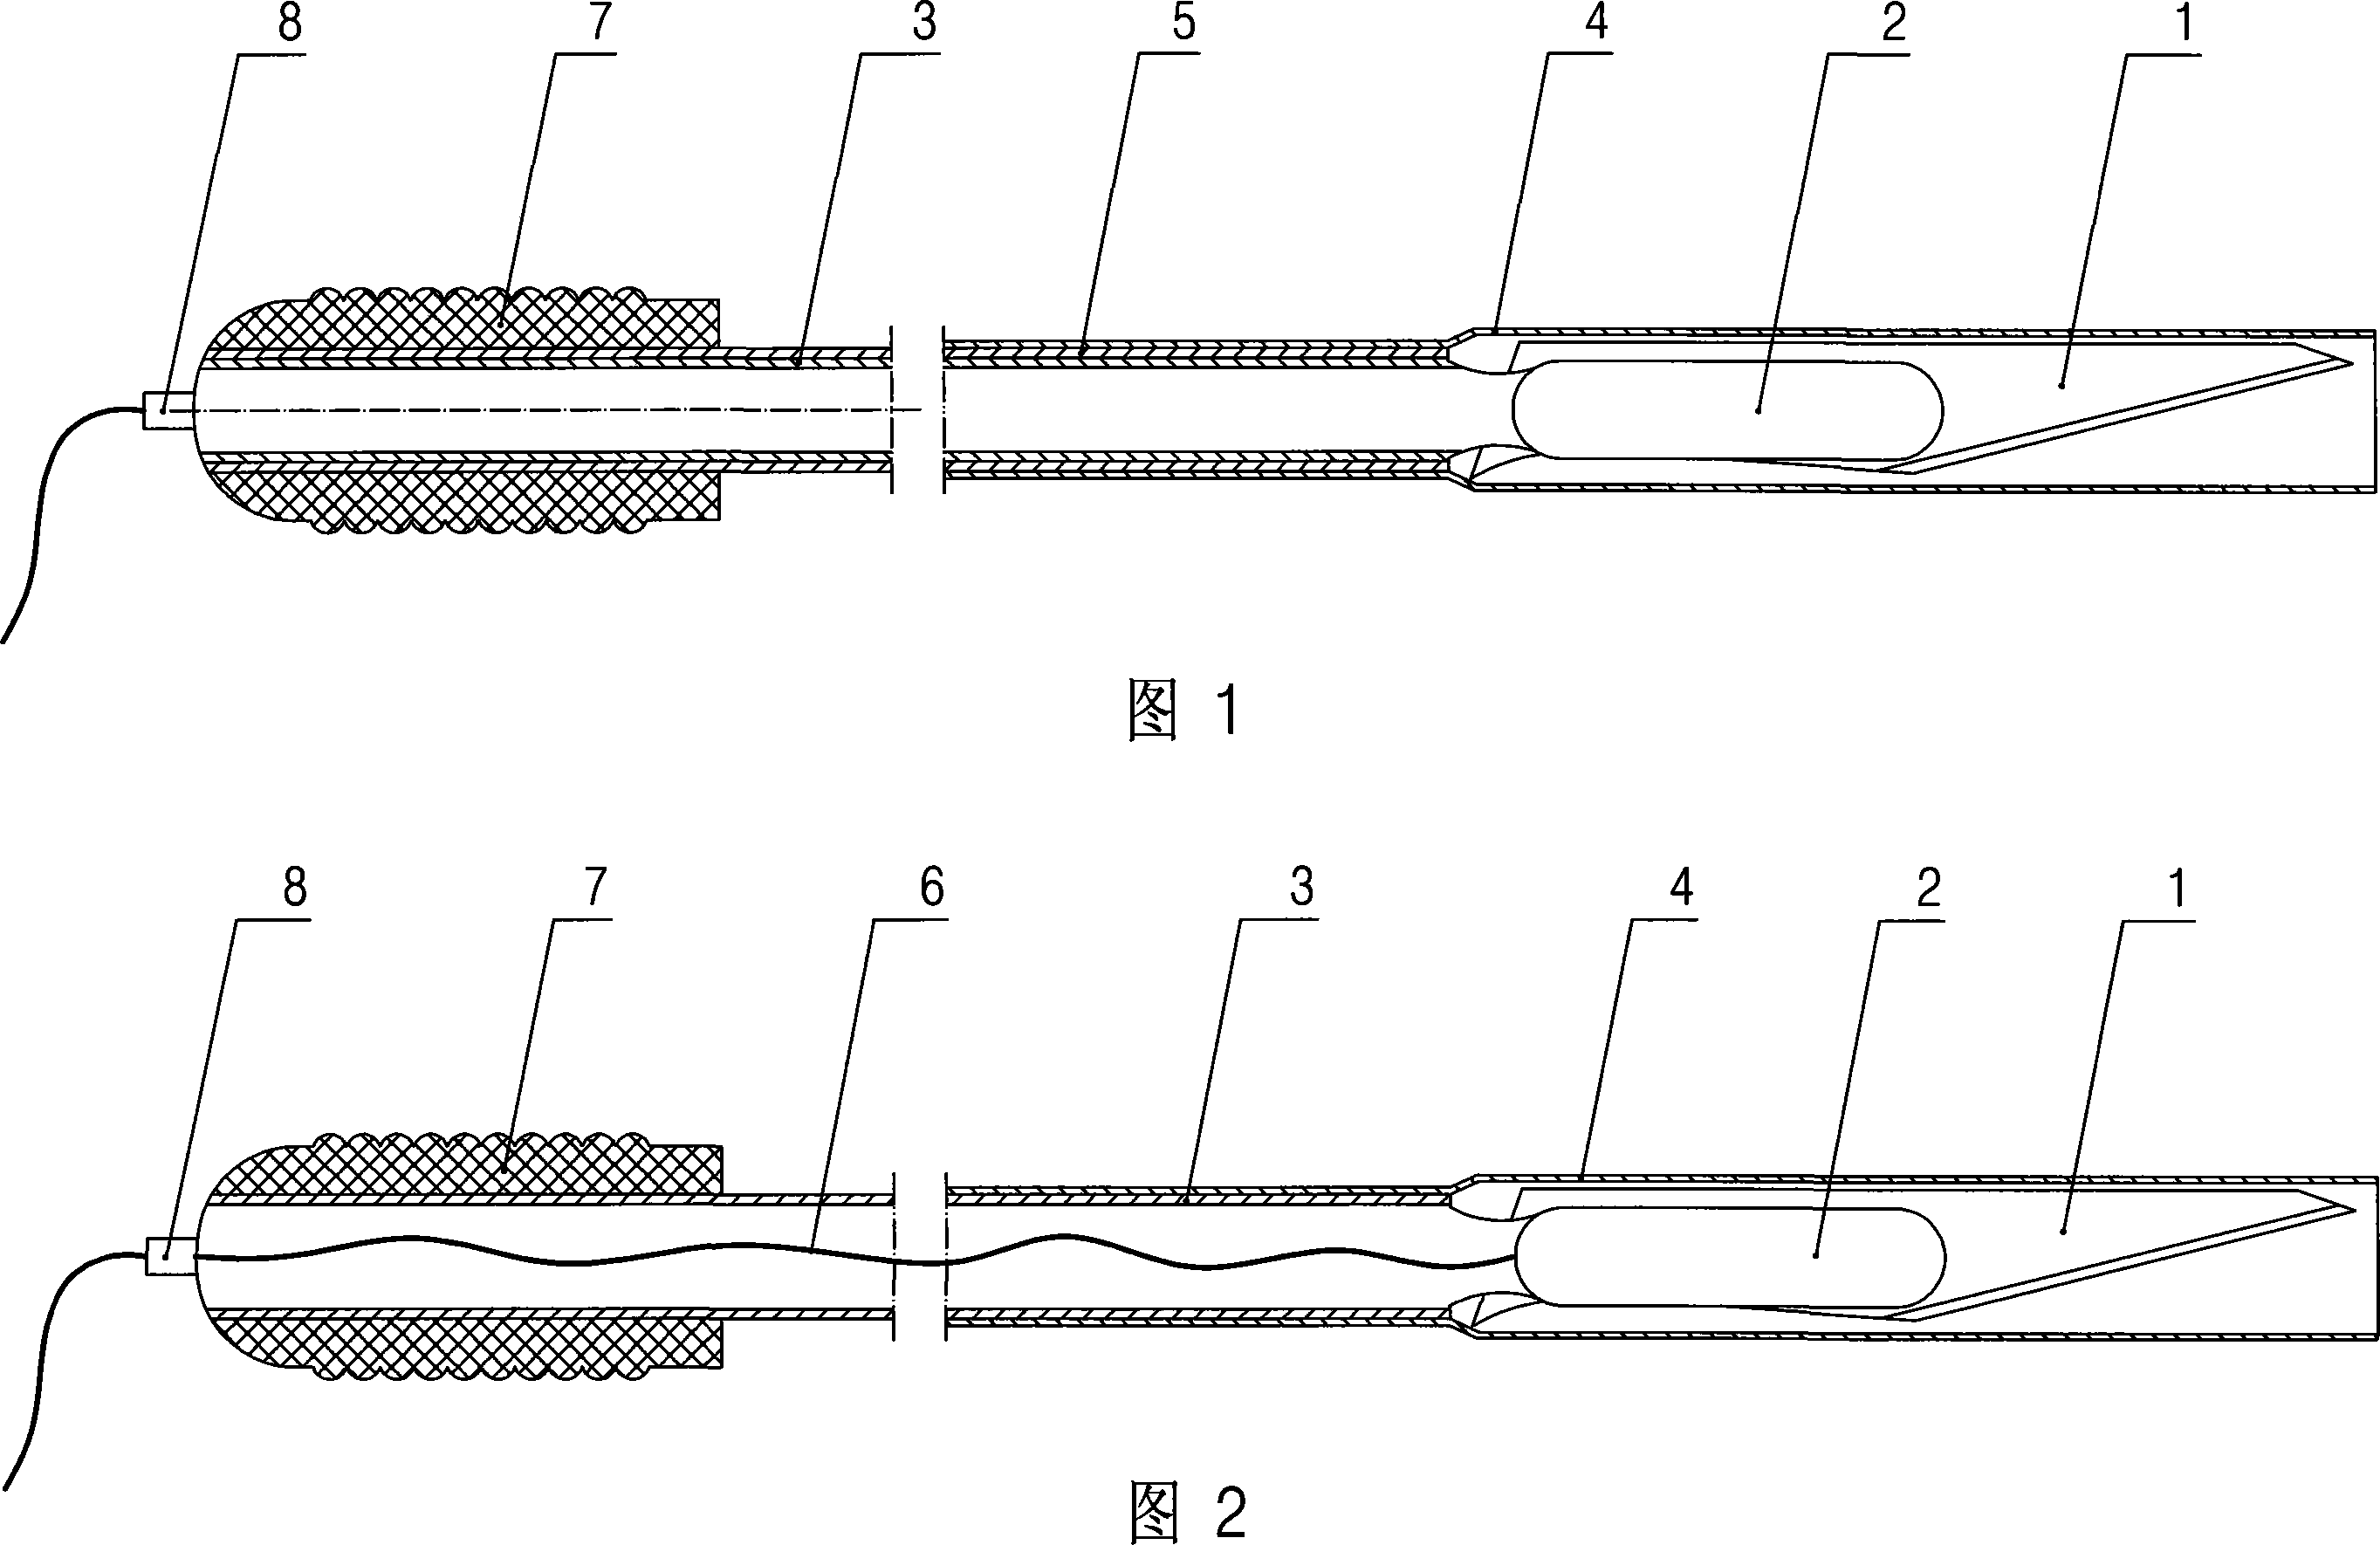 Toolbar for the operation of ureter under peritoneoscope